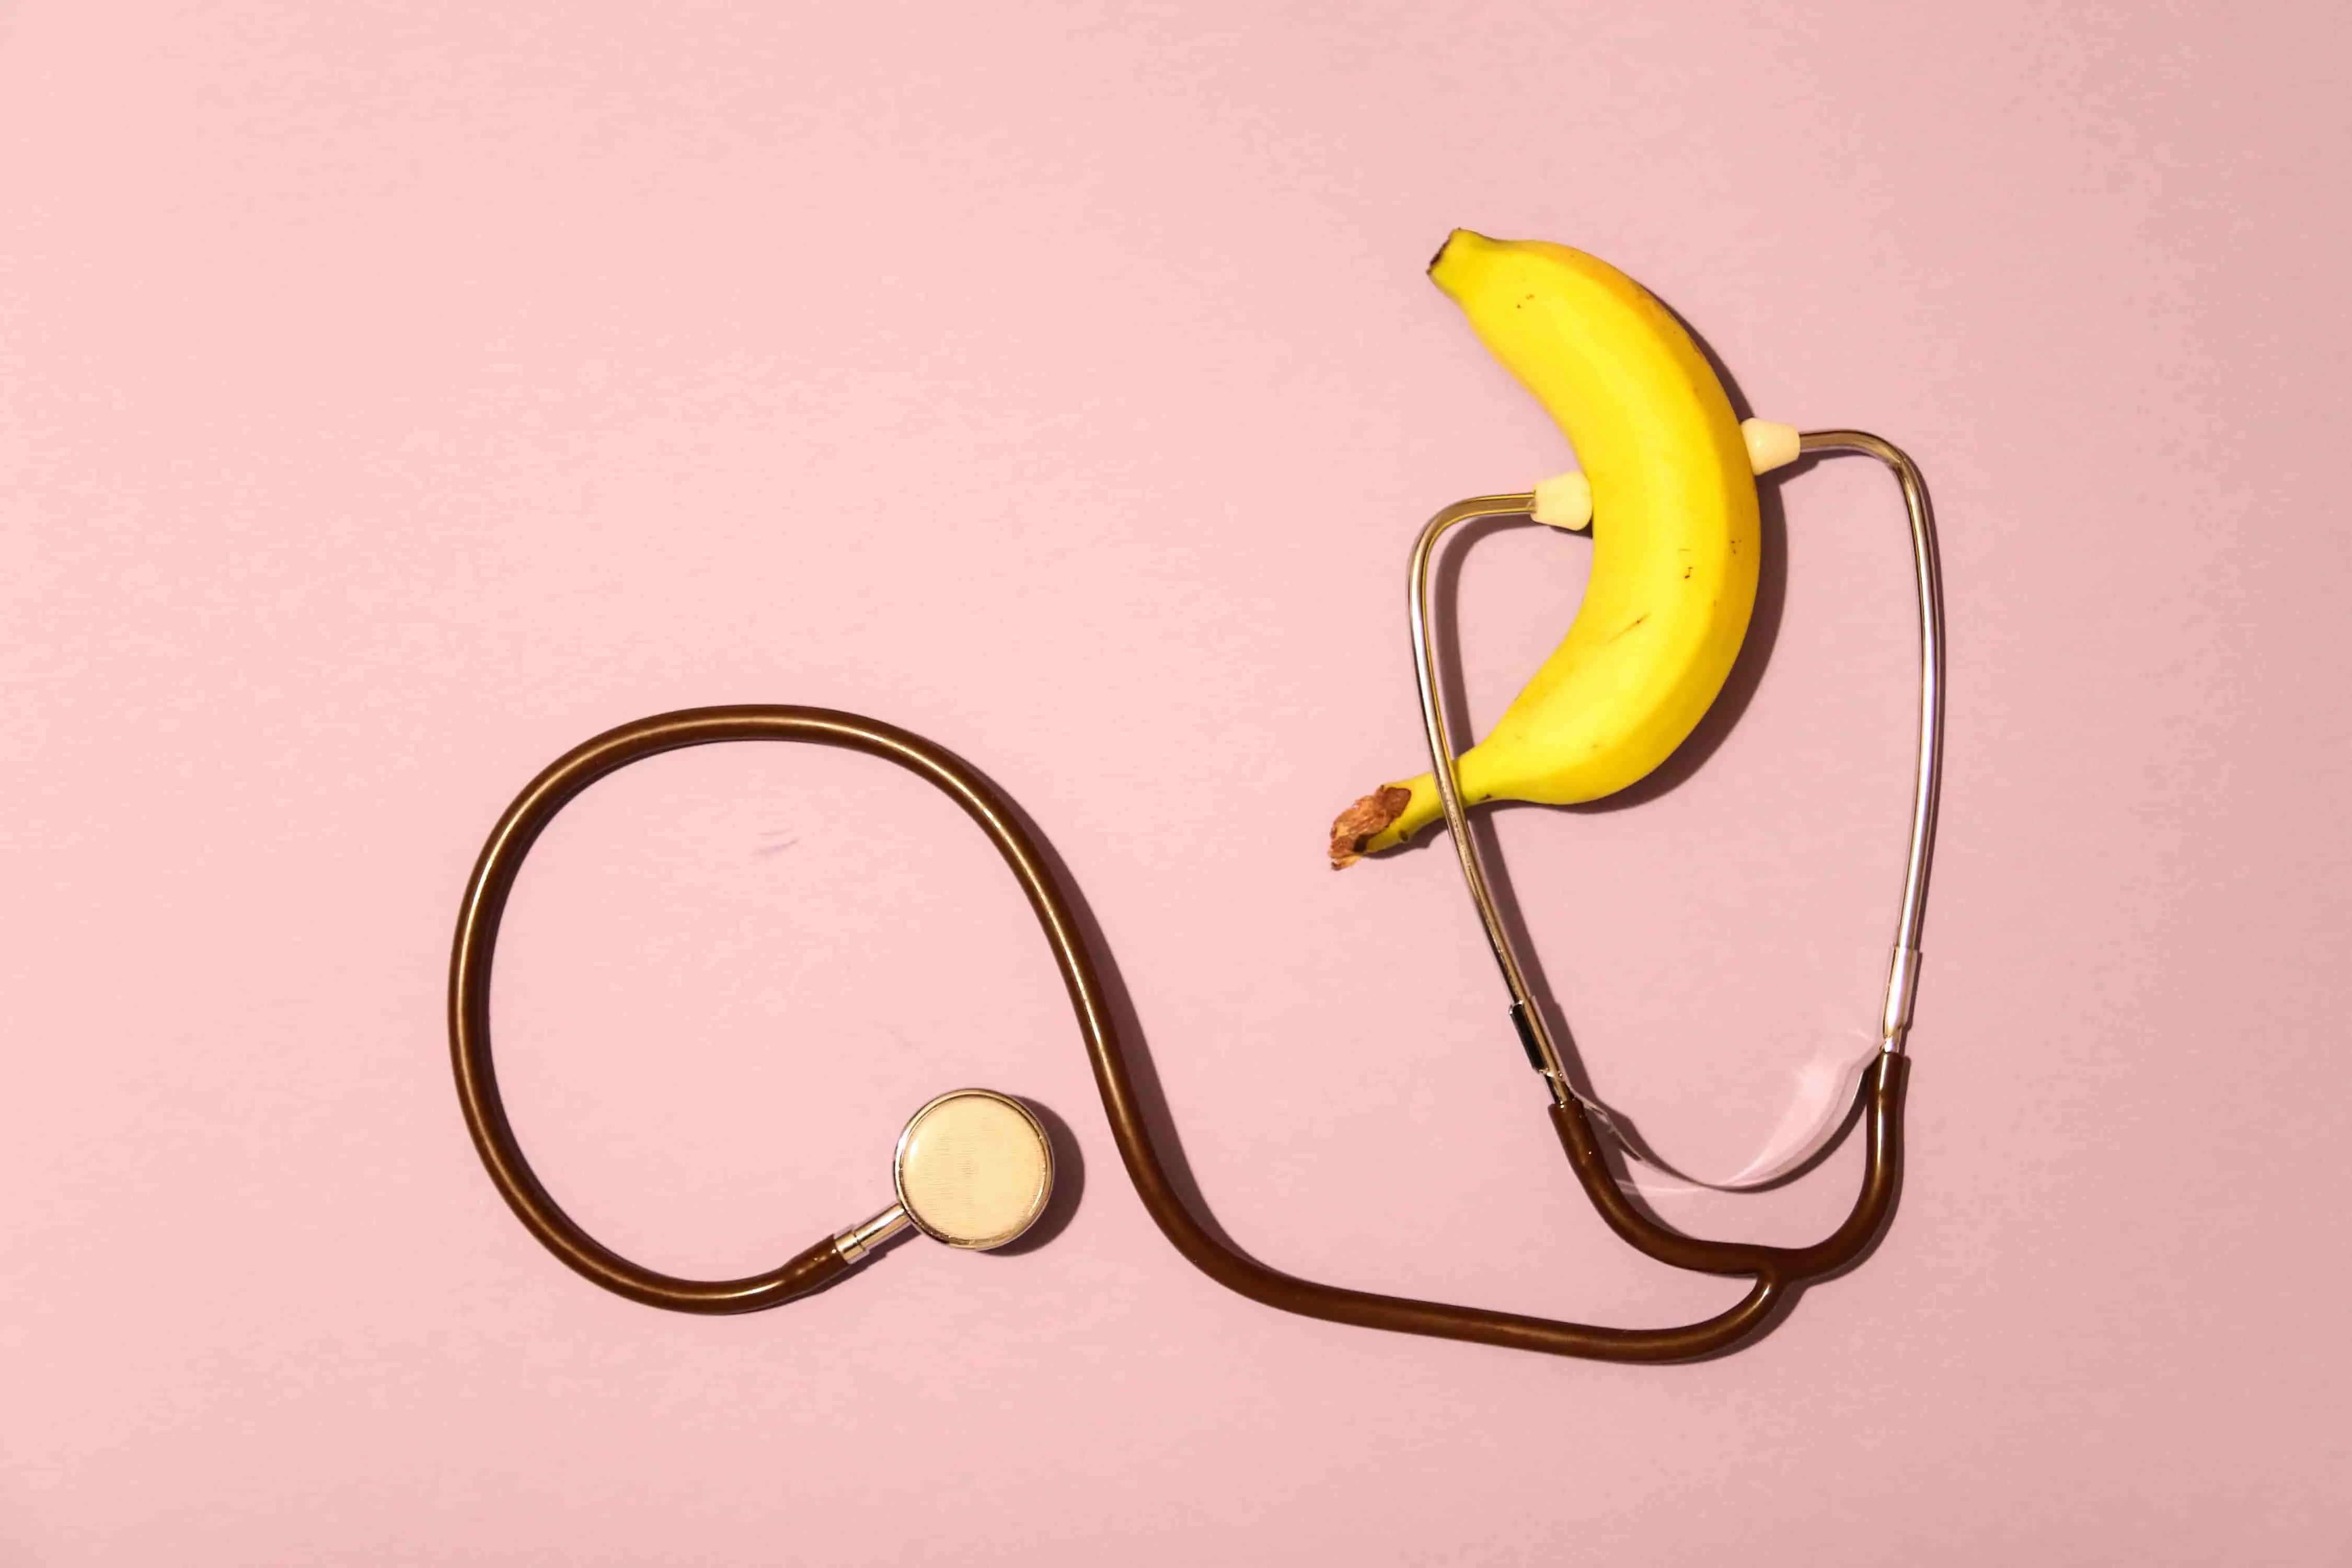 Picture of a stethoscope and a banana on a pink background